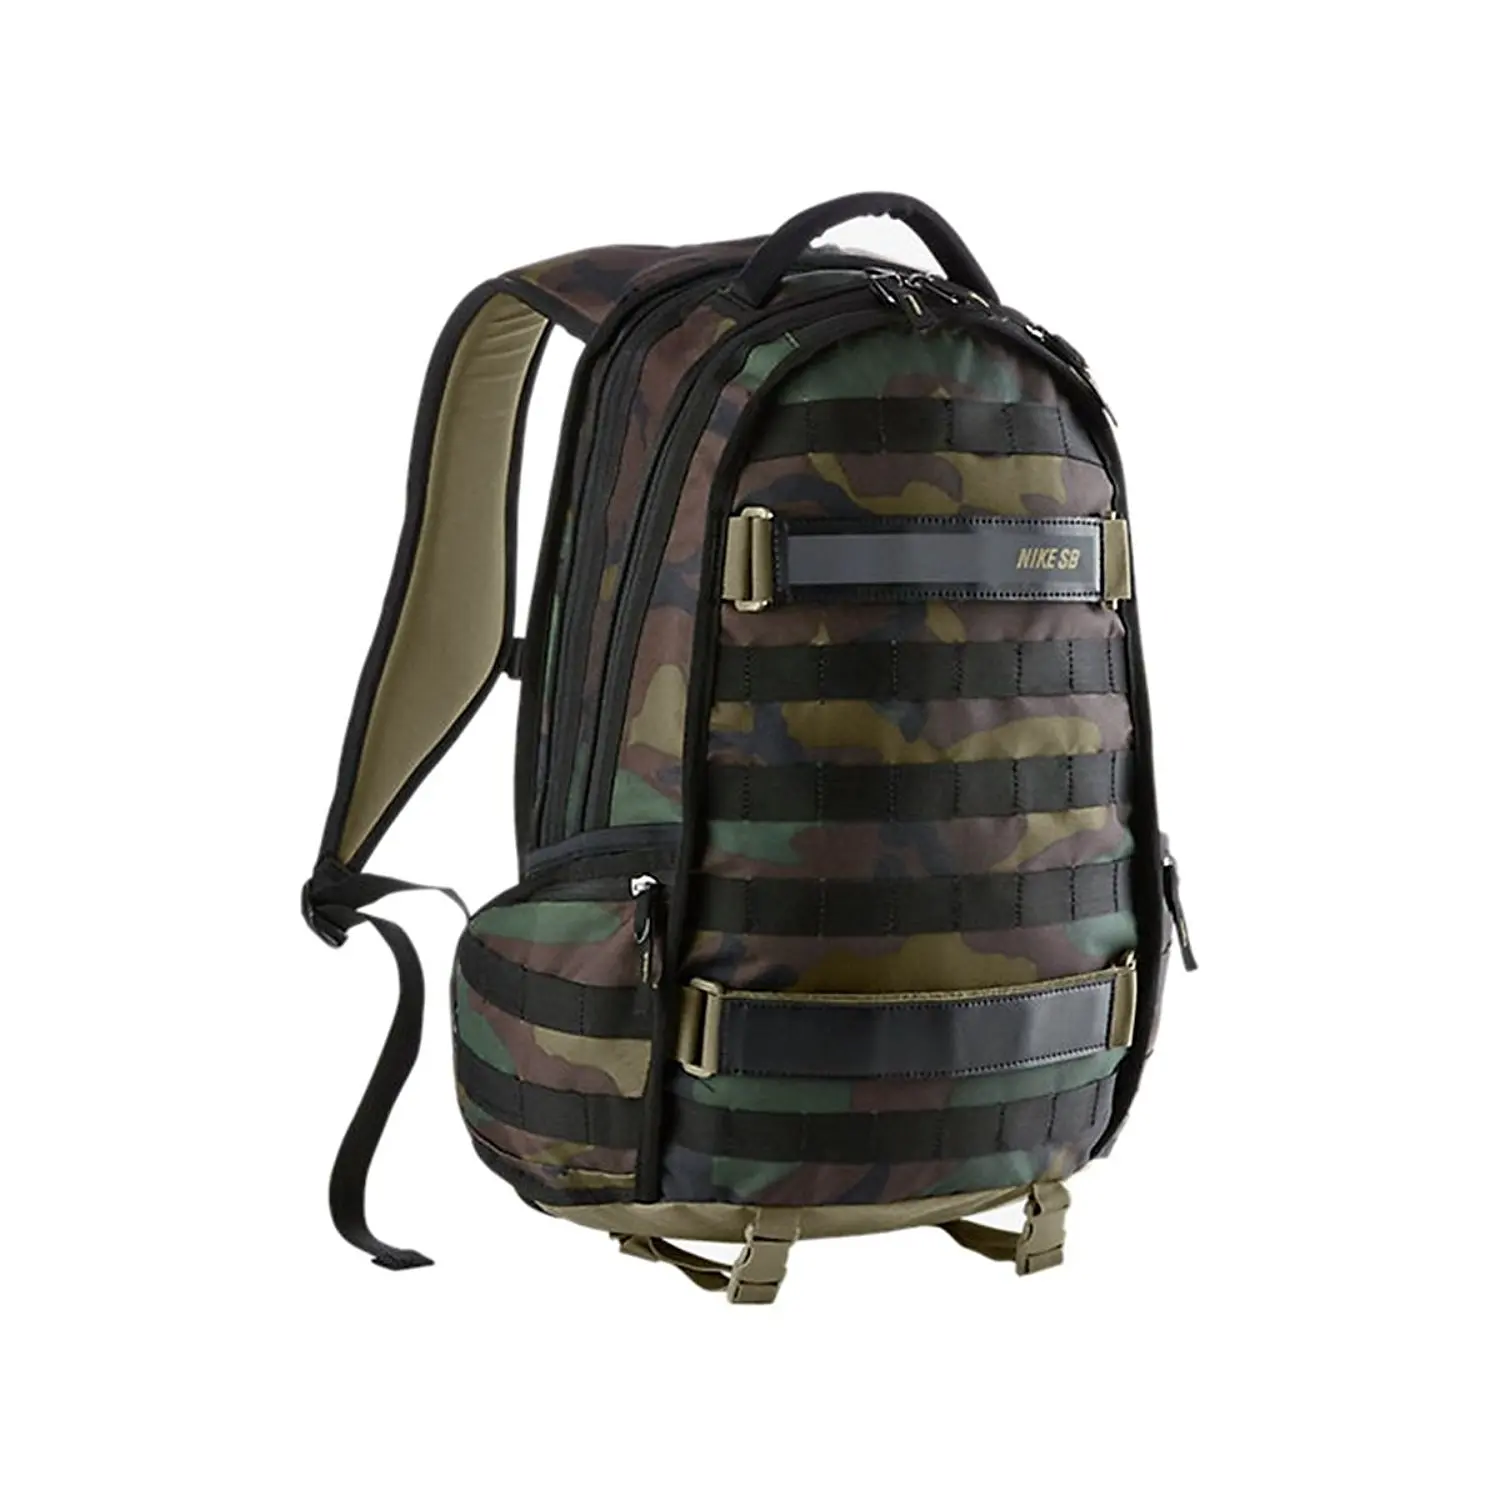 Buy Nike Sb Backpack Rpm Camo In Cheap Price On M Alibaba Com